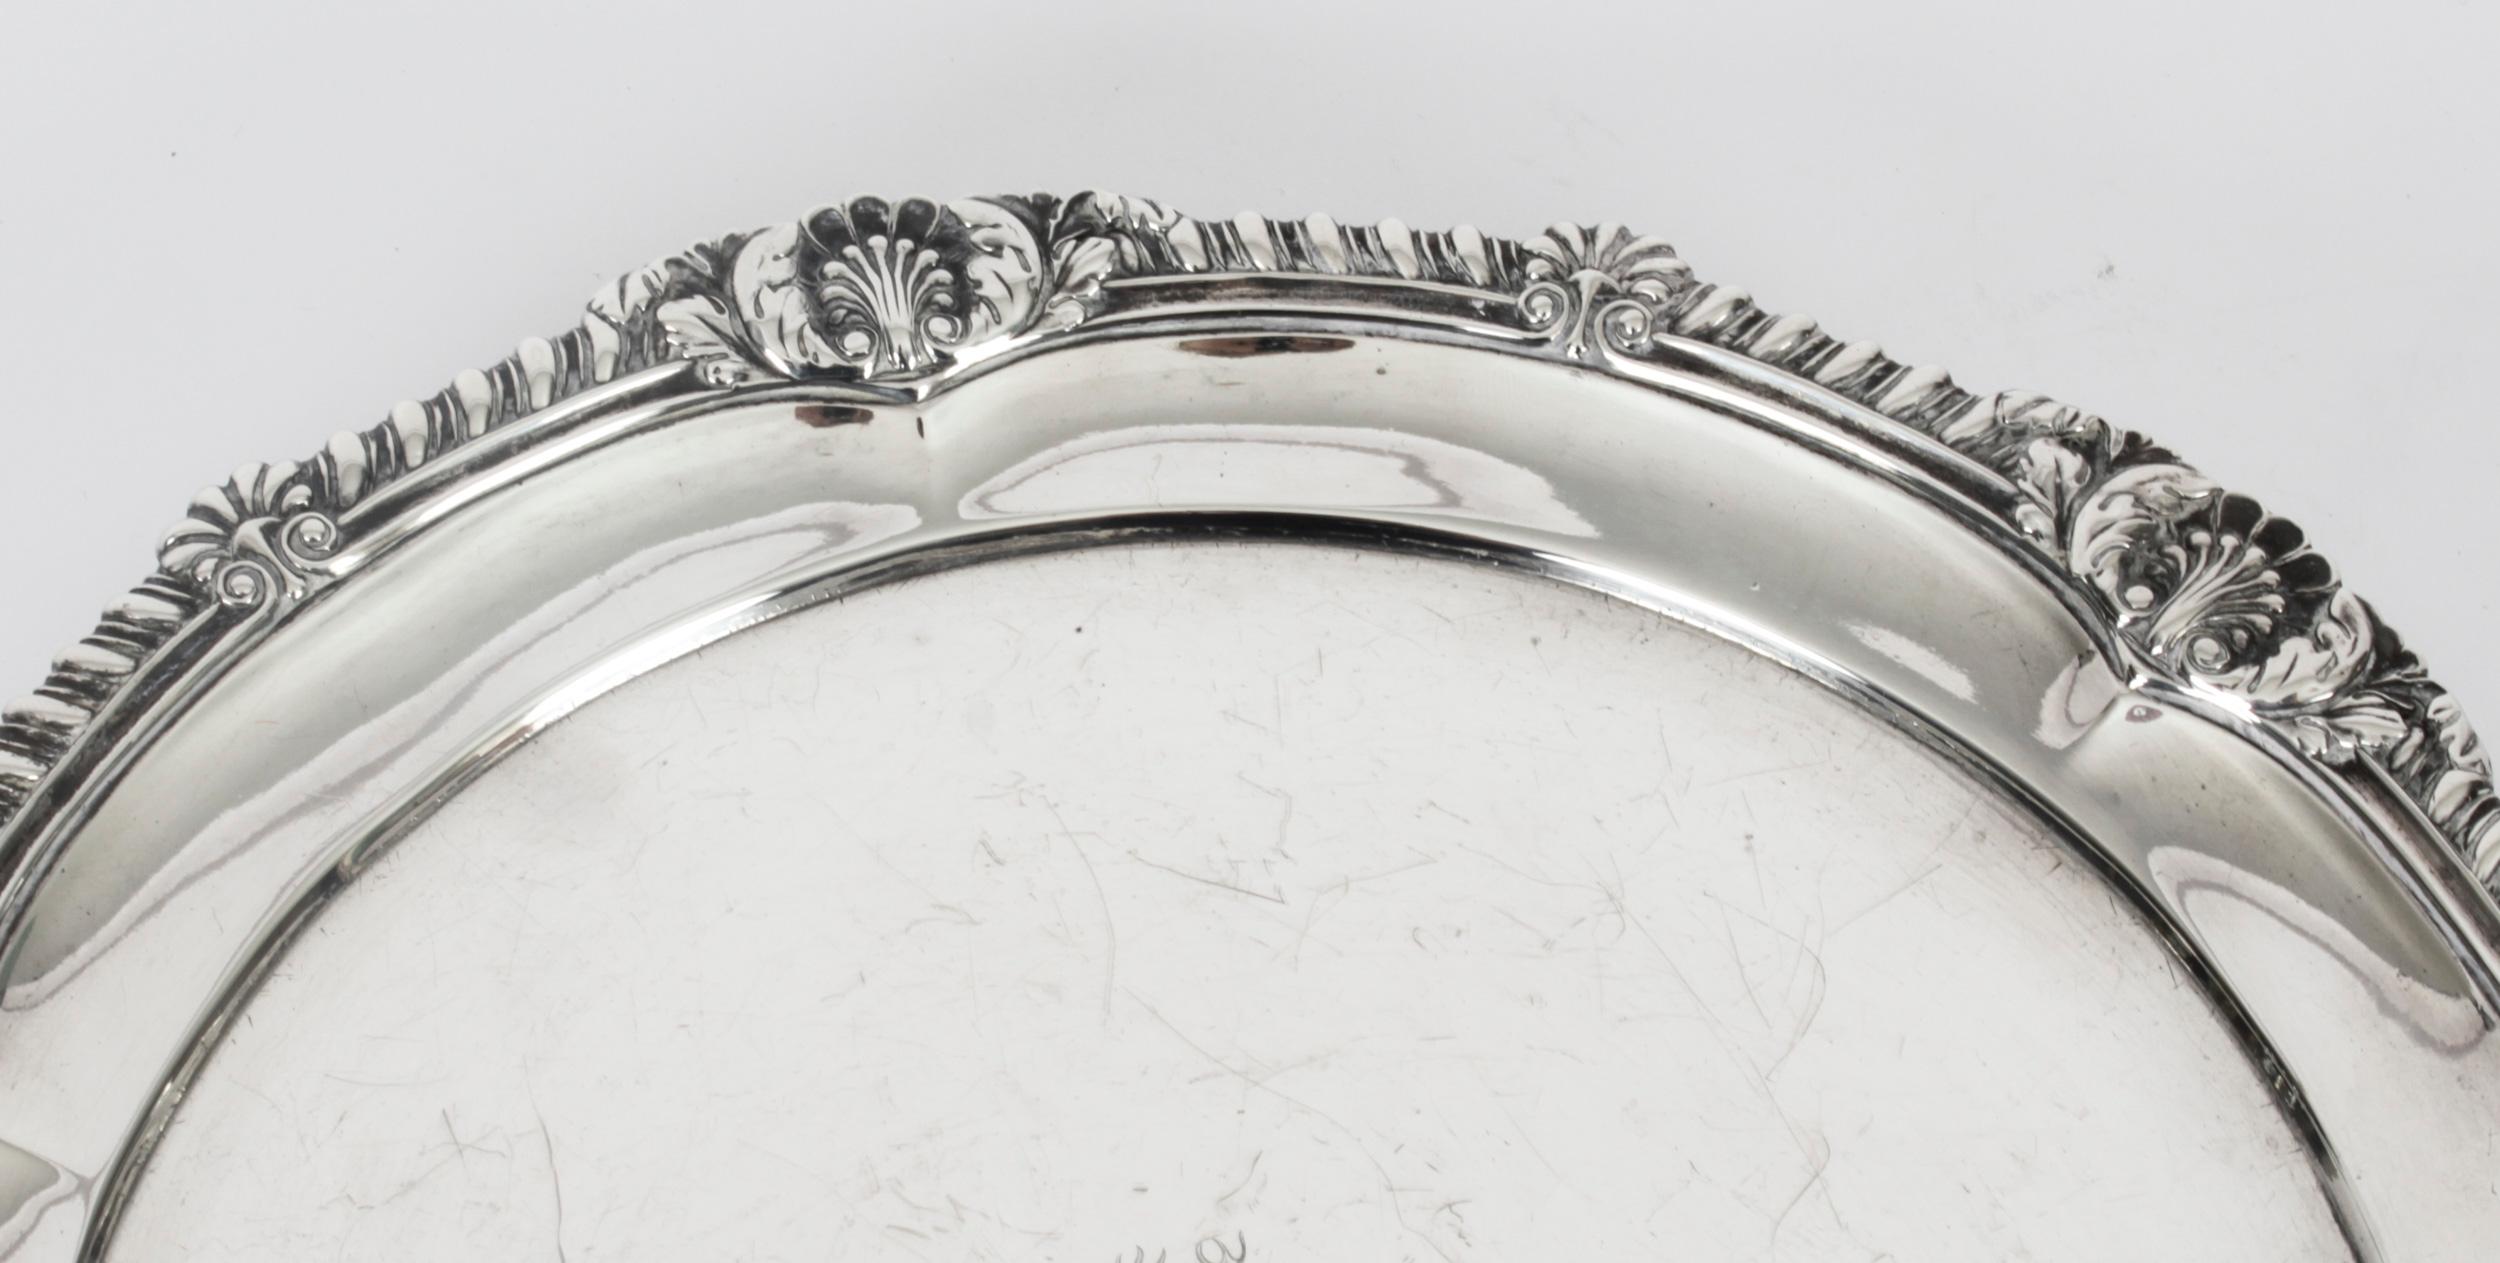 Early 19th Century Antique George III Sterling Silver Salver by Paul Storr 1811 19th Century For Sale